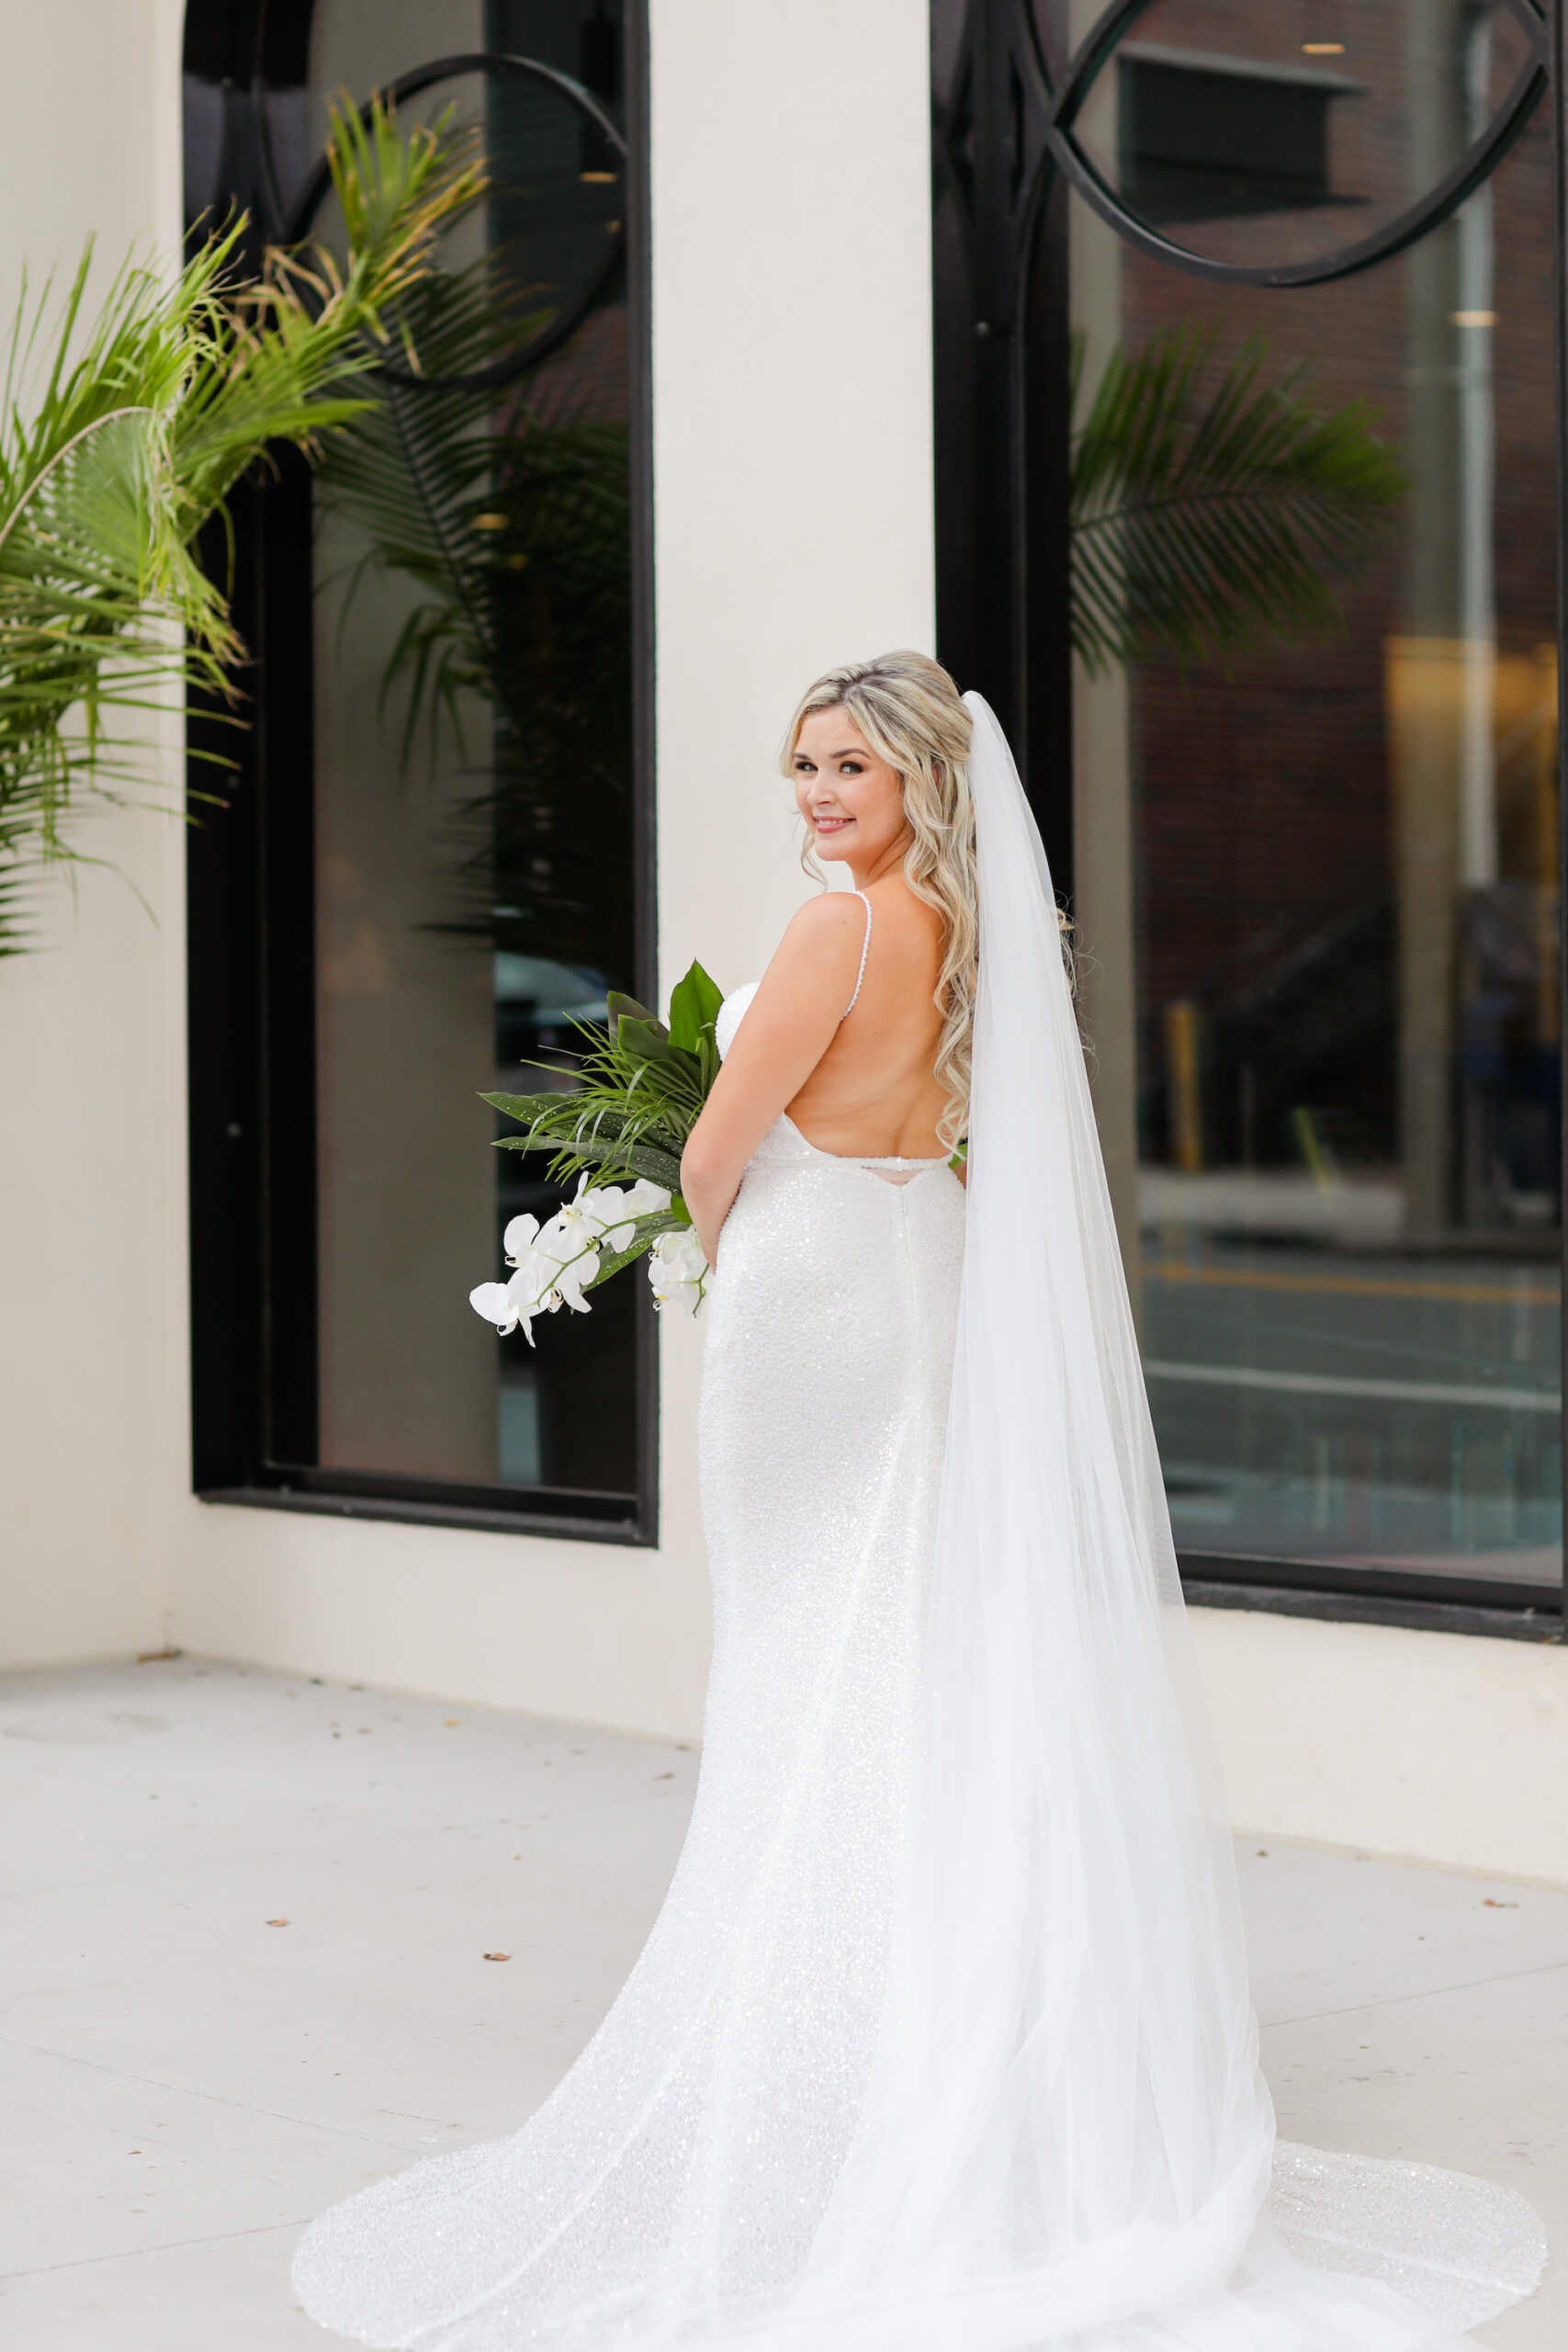 Bride in Backless Fitted Wedding Dress with Cathedral Veil | Tampa Hair and Makeup Artist Femme Akoi | Lifelong Photography Studio